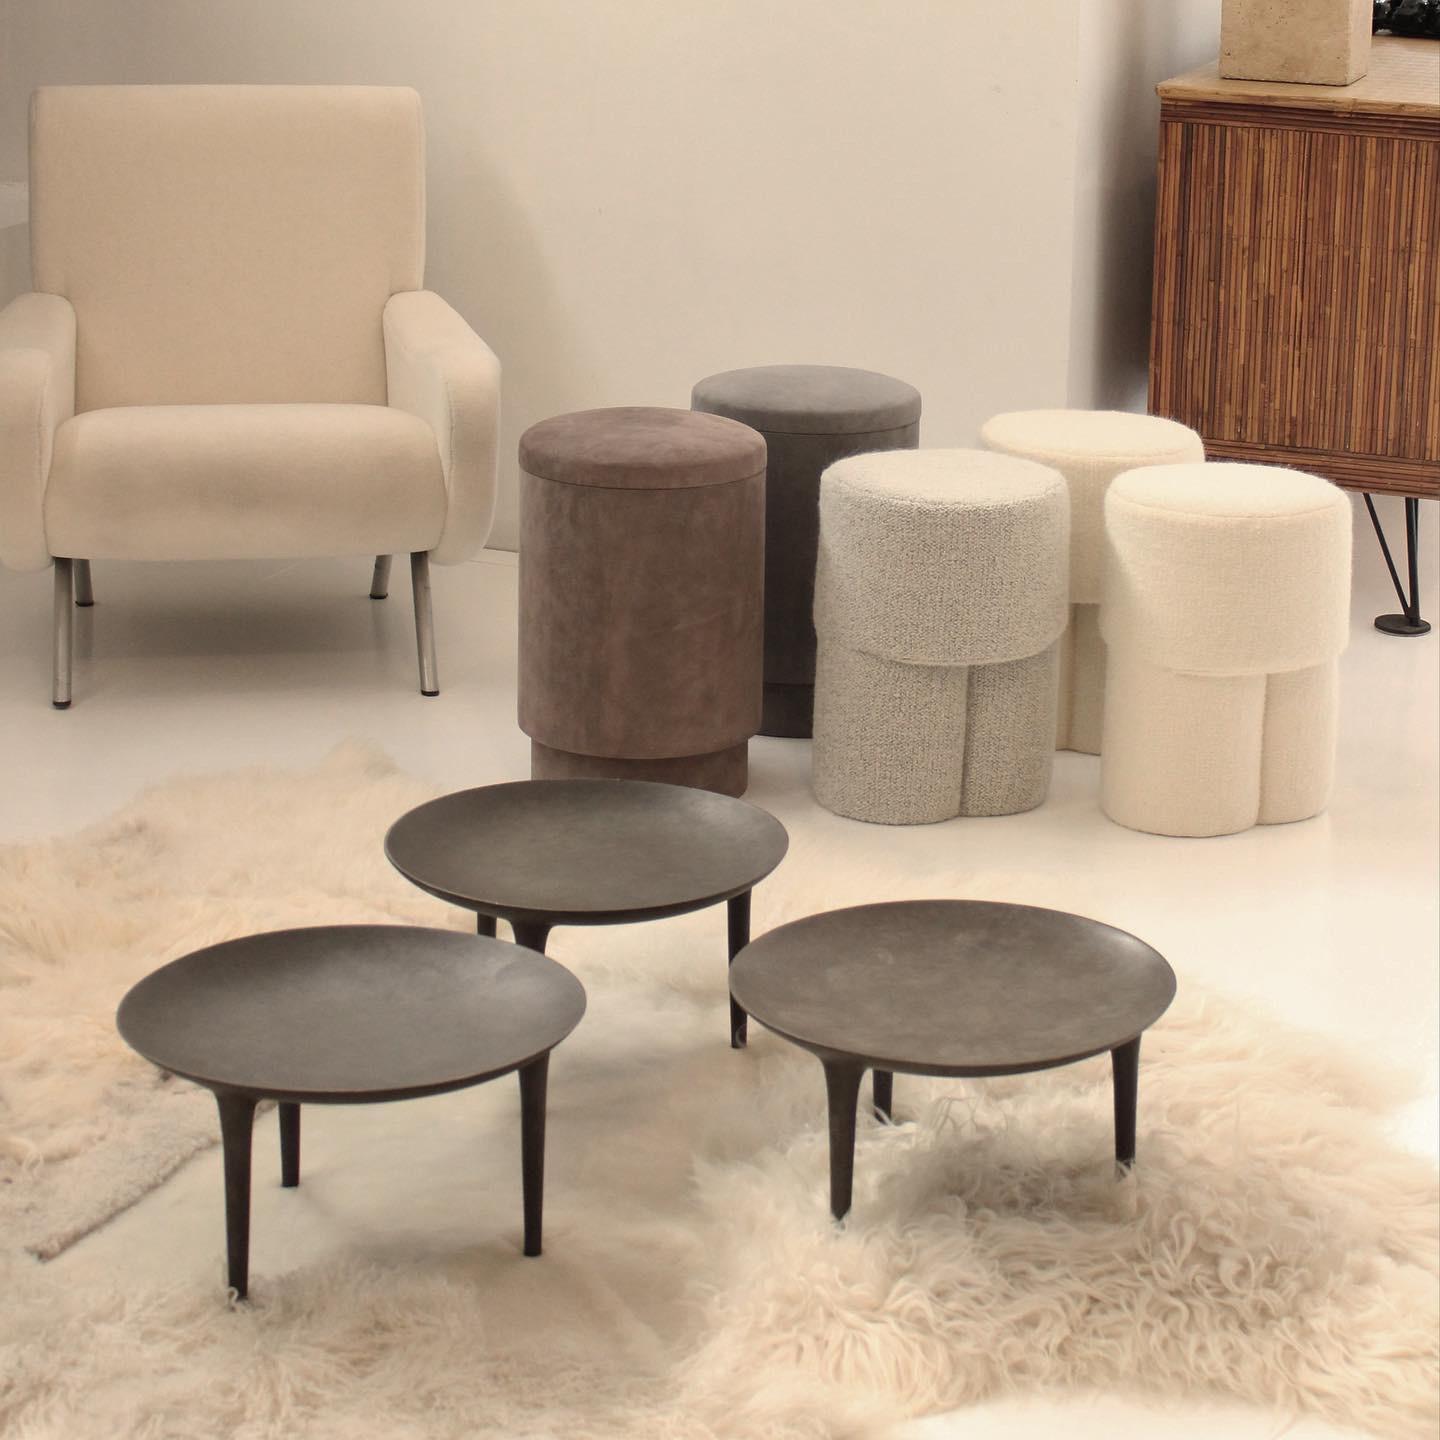 Suede Michael Verheyden Belgian Design Contemporary Pouf or Tabou with Storage